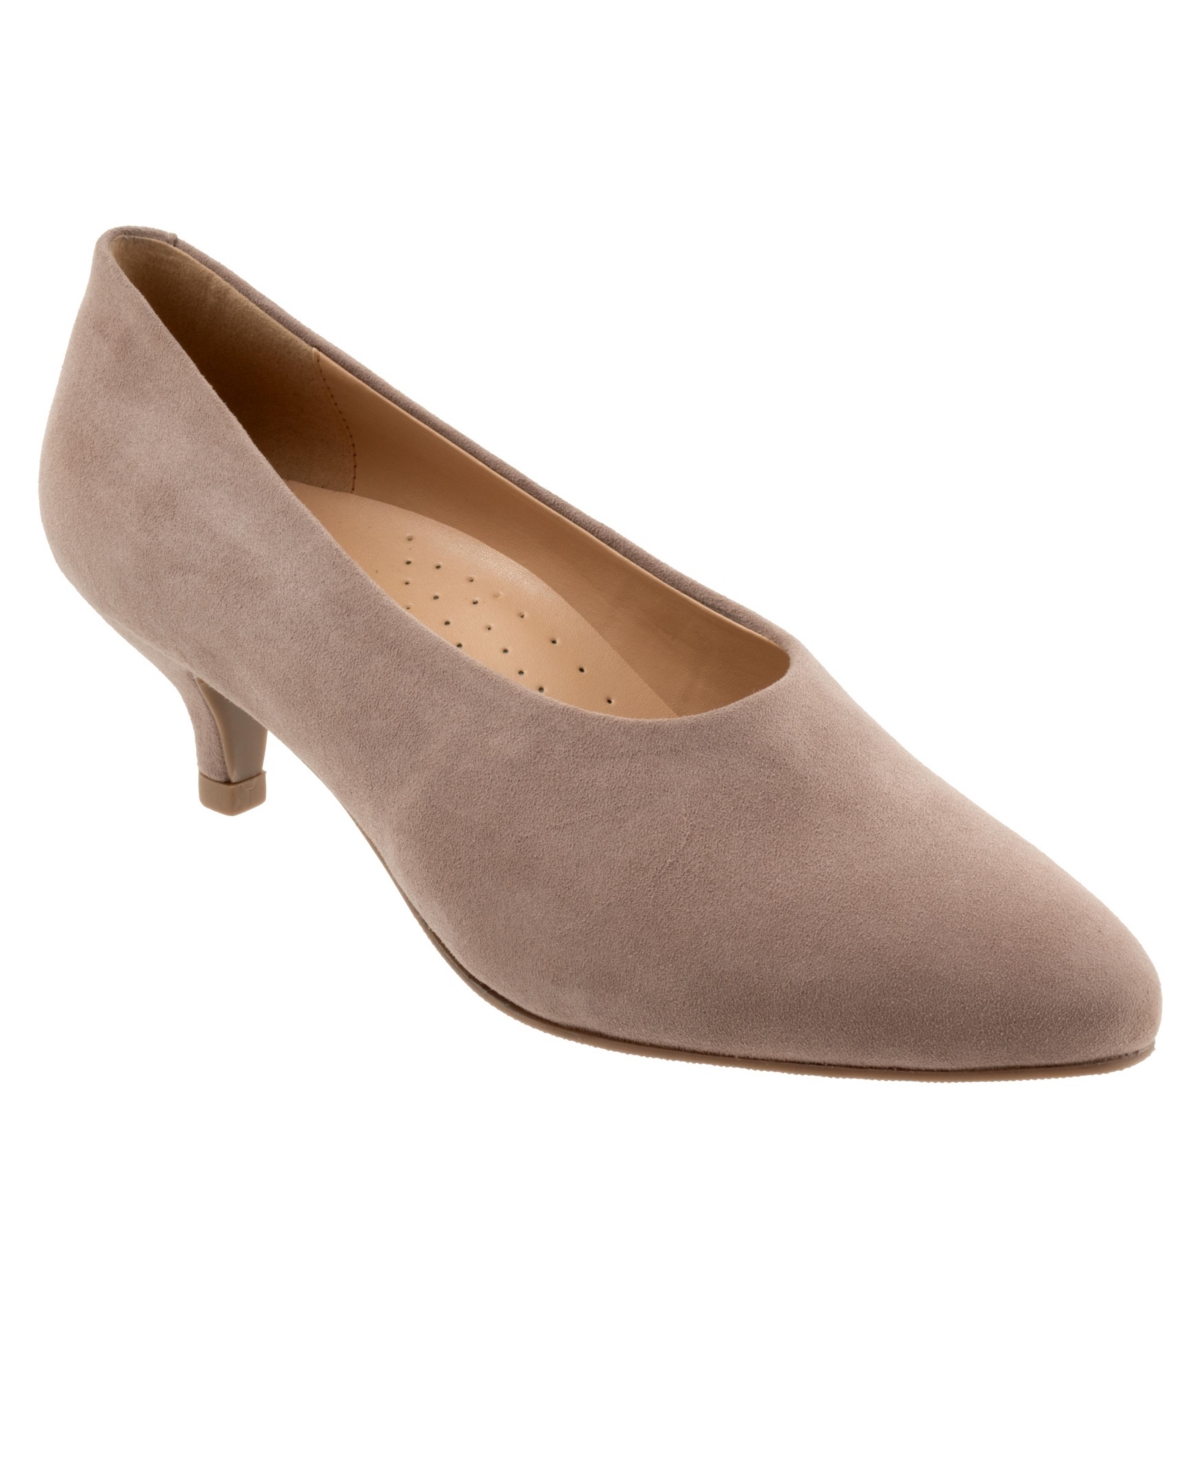 Women's Trotters Kimber Pumps - Taupe suede